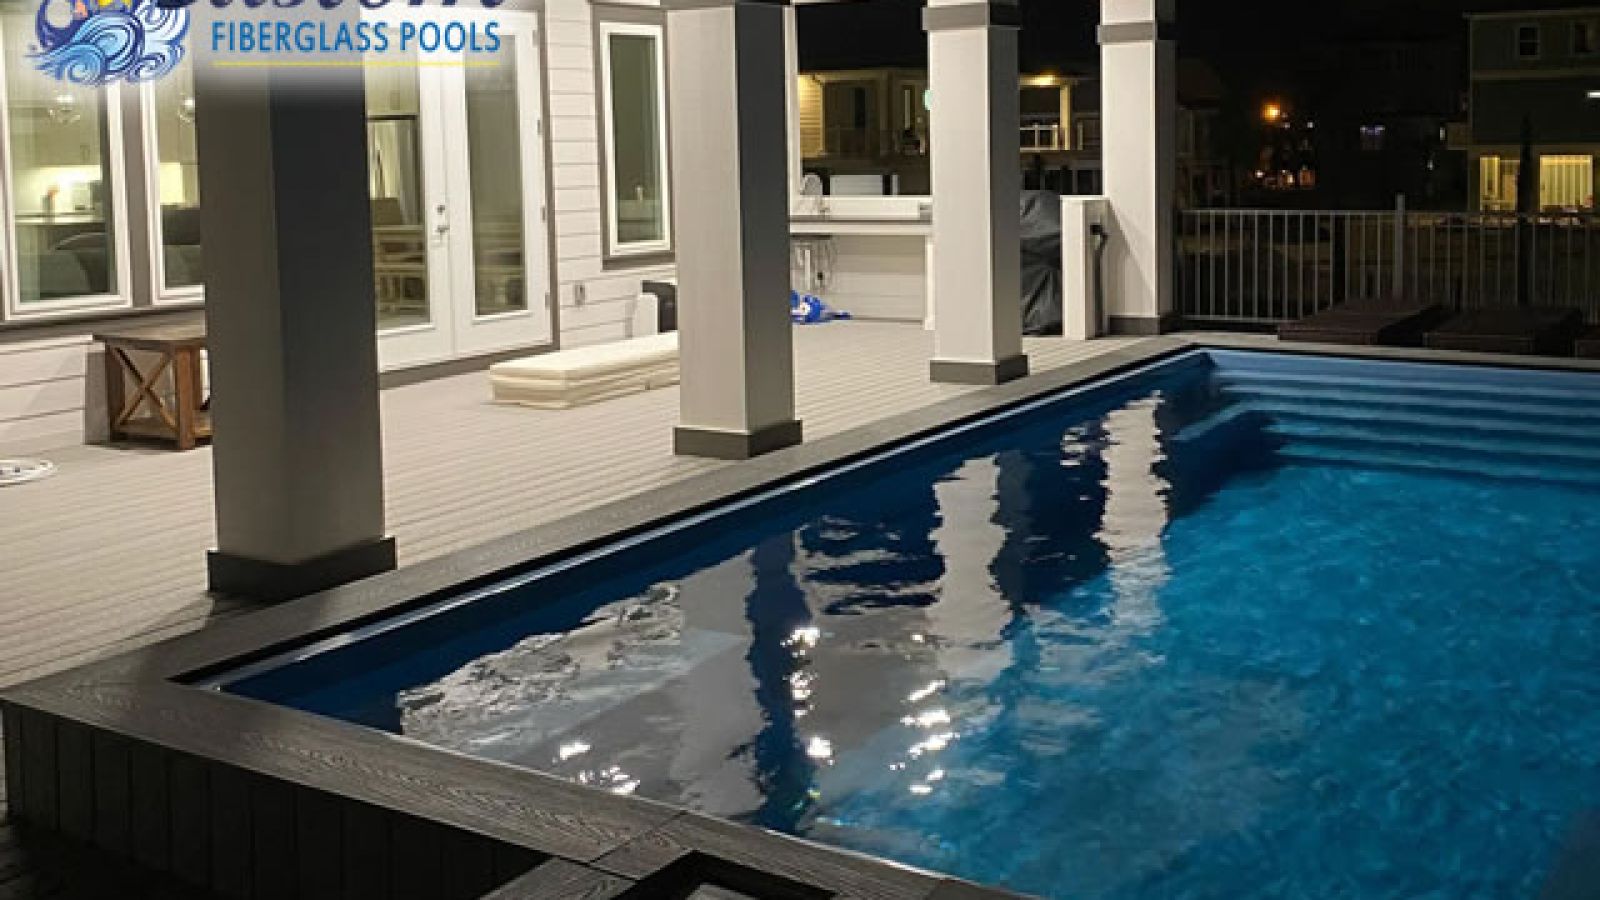 Seaside Rectangle Fiberglass Pool offering a fun and relaxing family experience in Clarksville, TN